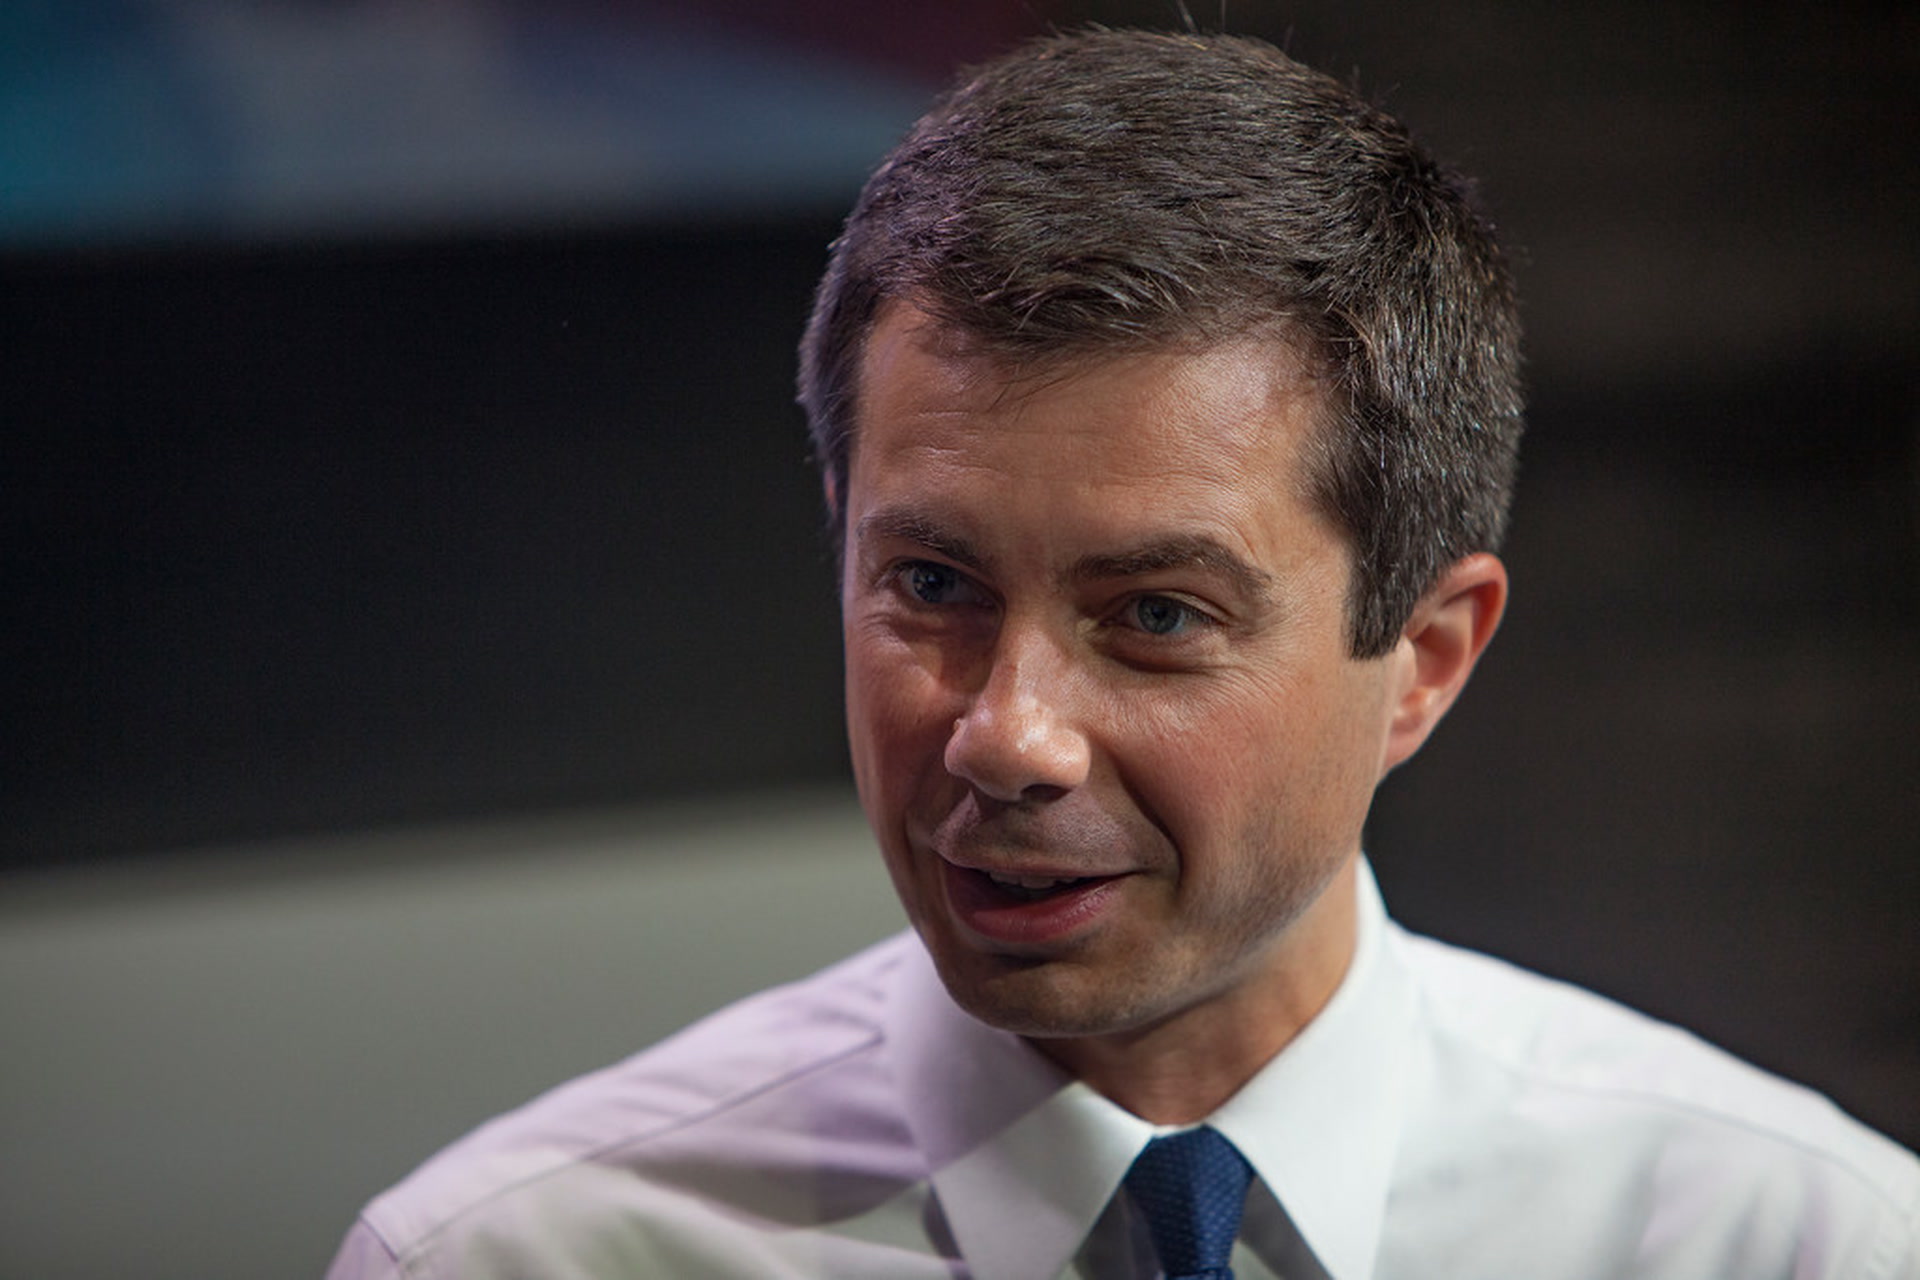 Pete Buttigieg interview: Nevada’s diversity, economy serve as map for country ...1920 x 1280